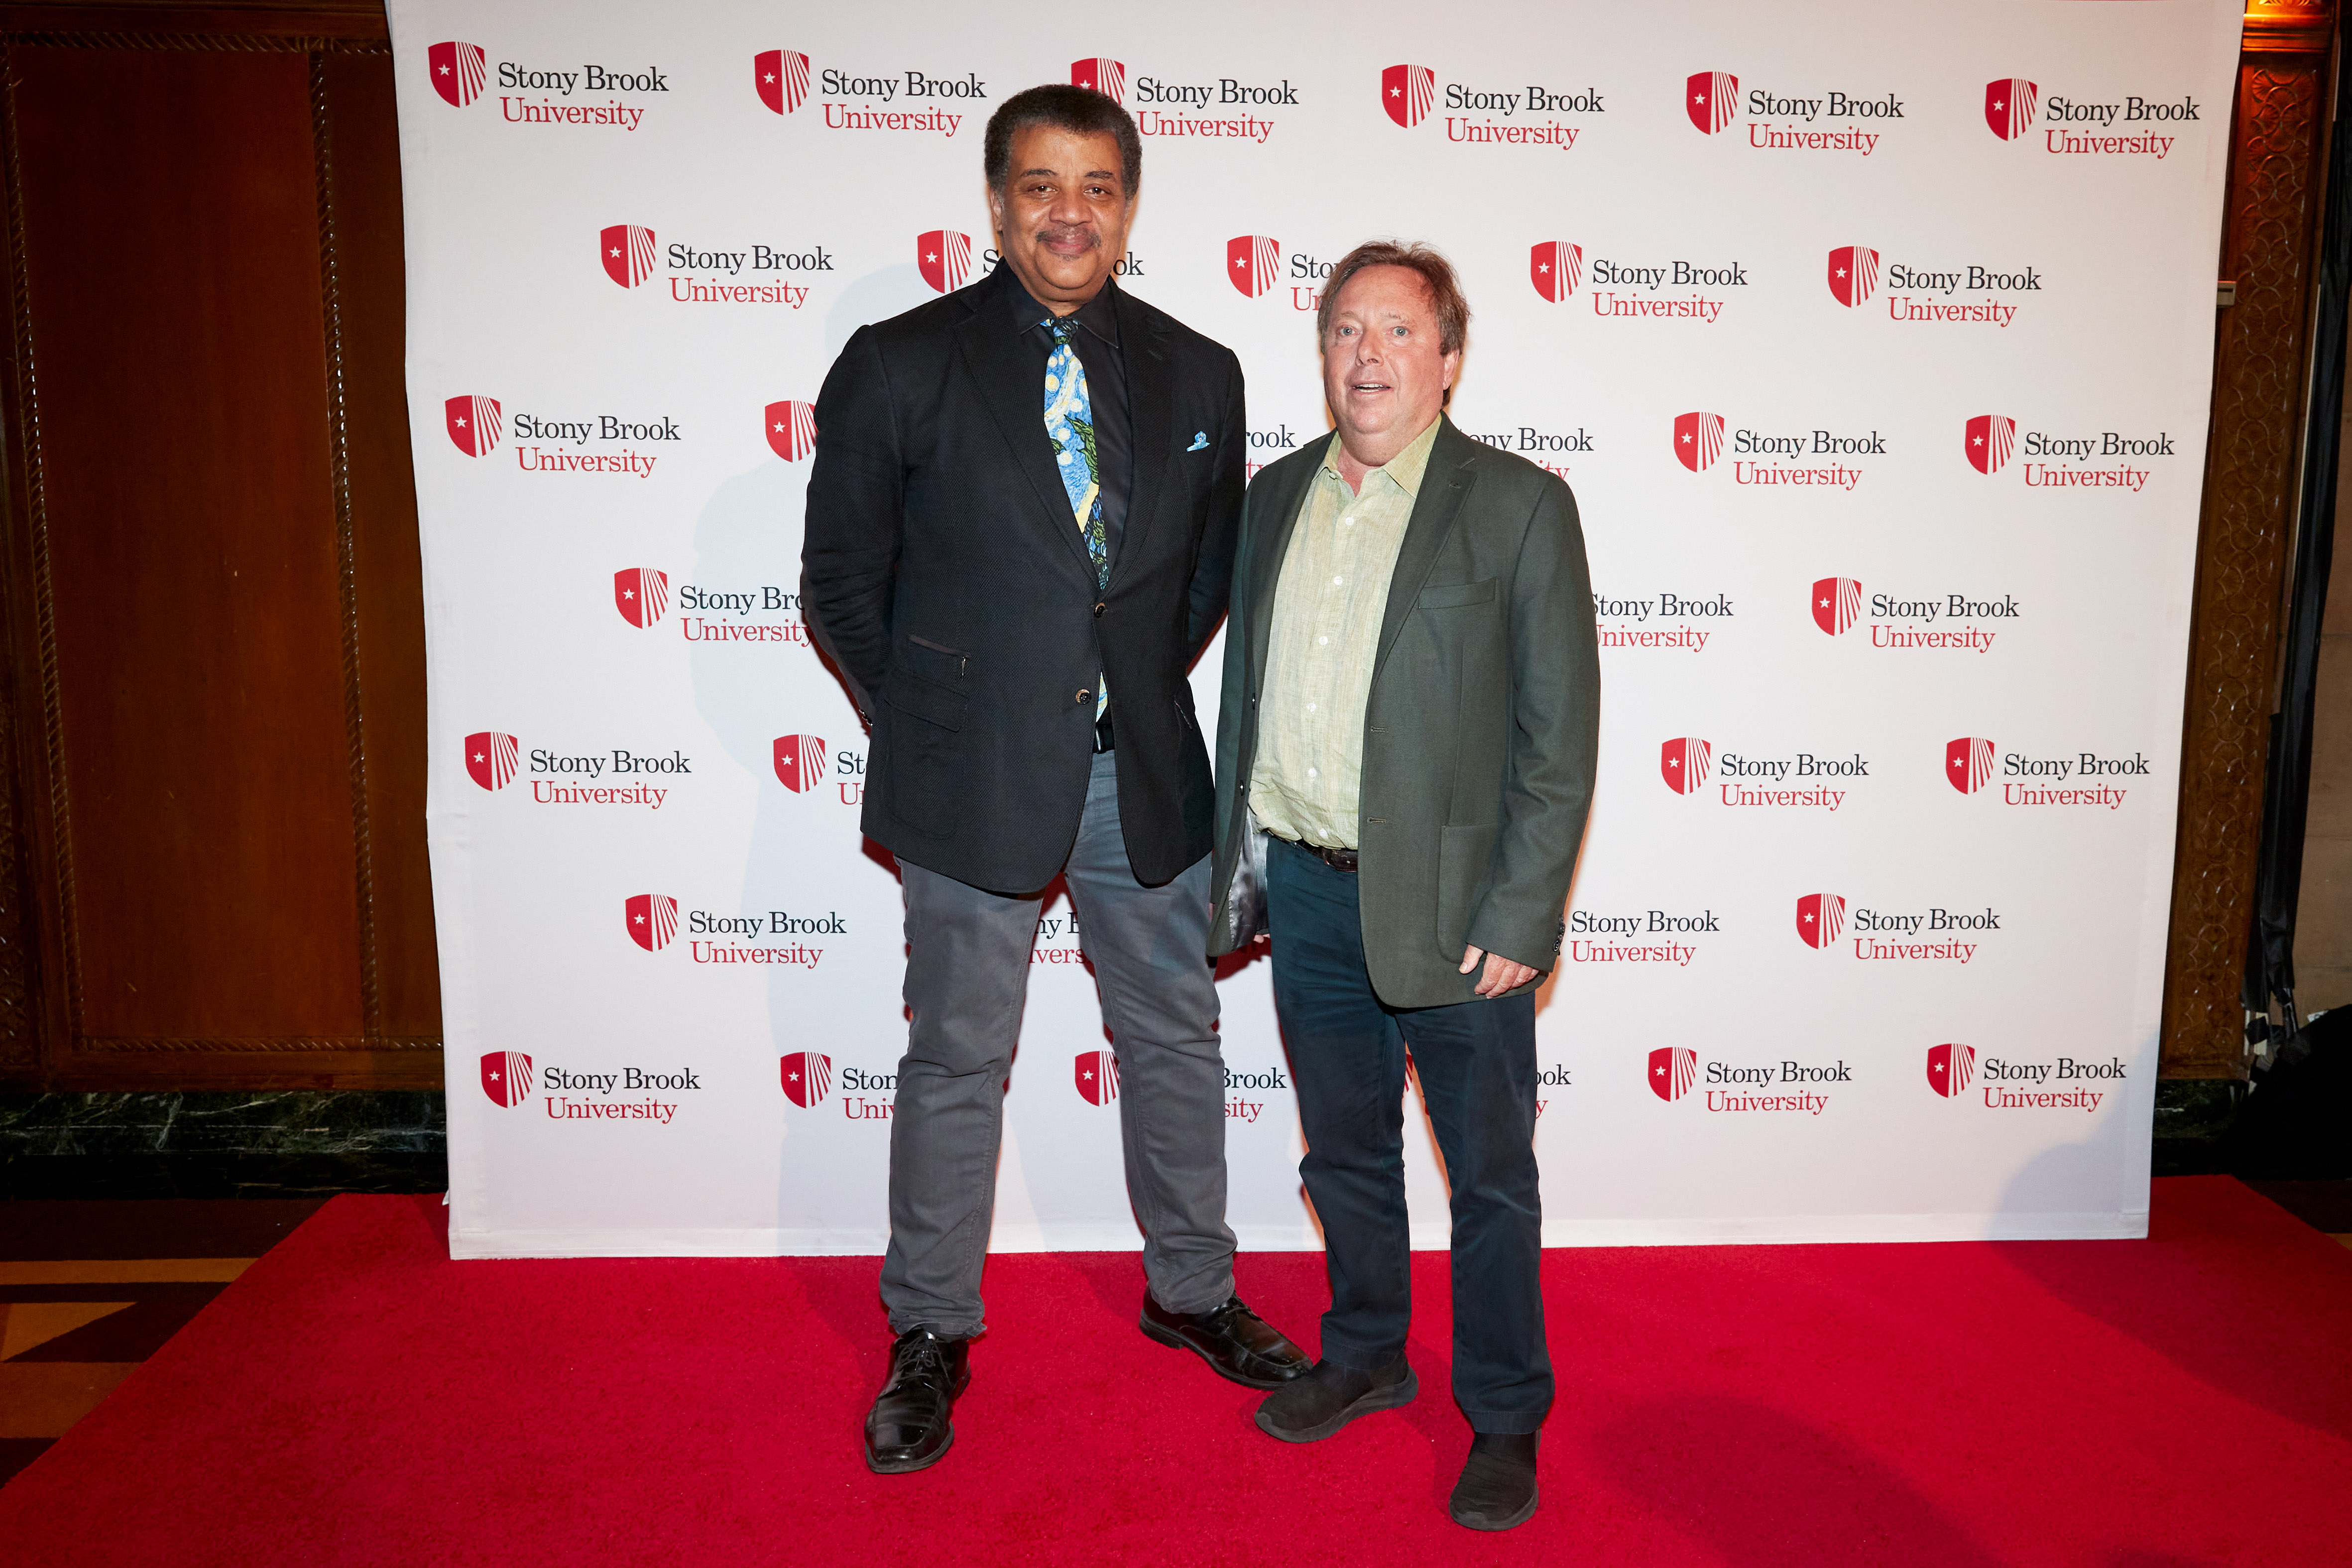 Gala Honoree Neil deGrasse Tyson with Stony Brook Foundation Chair and CEO of IMAX Corporation Richard Gelfond ’76. (Photo by Juliana Thomas)